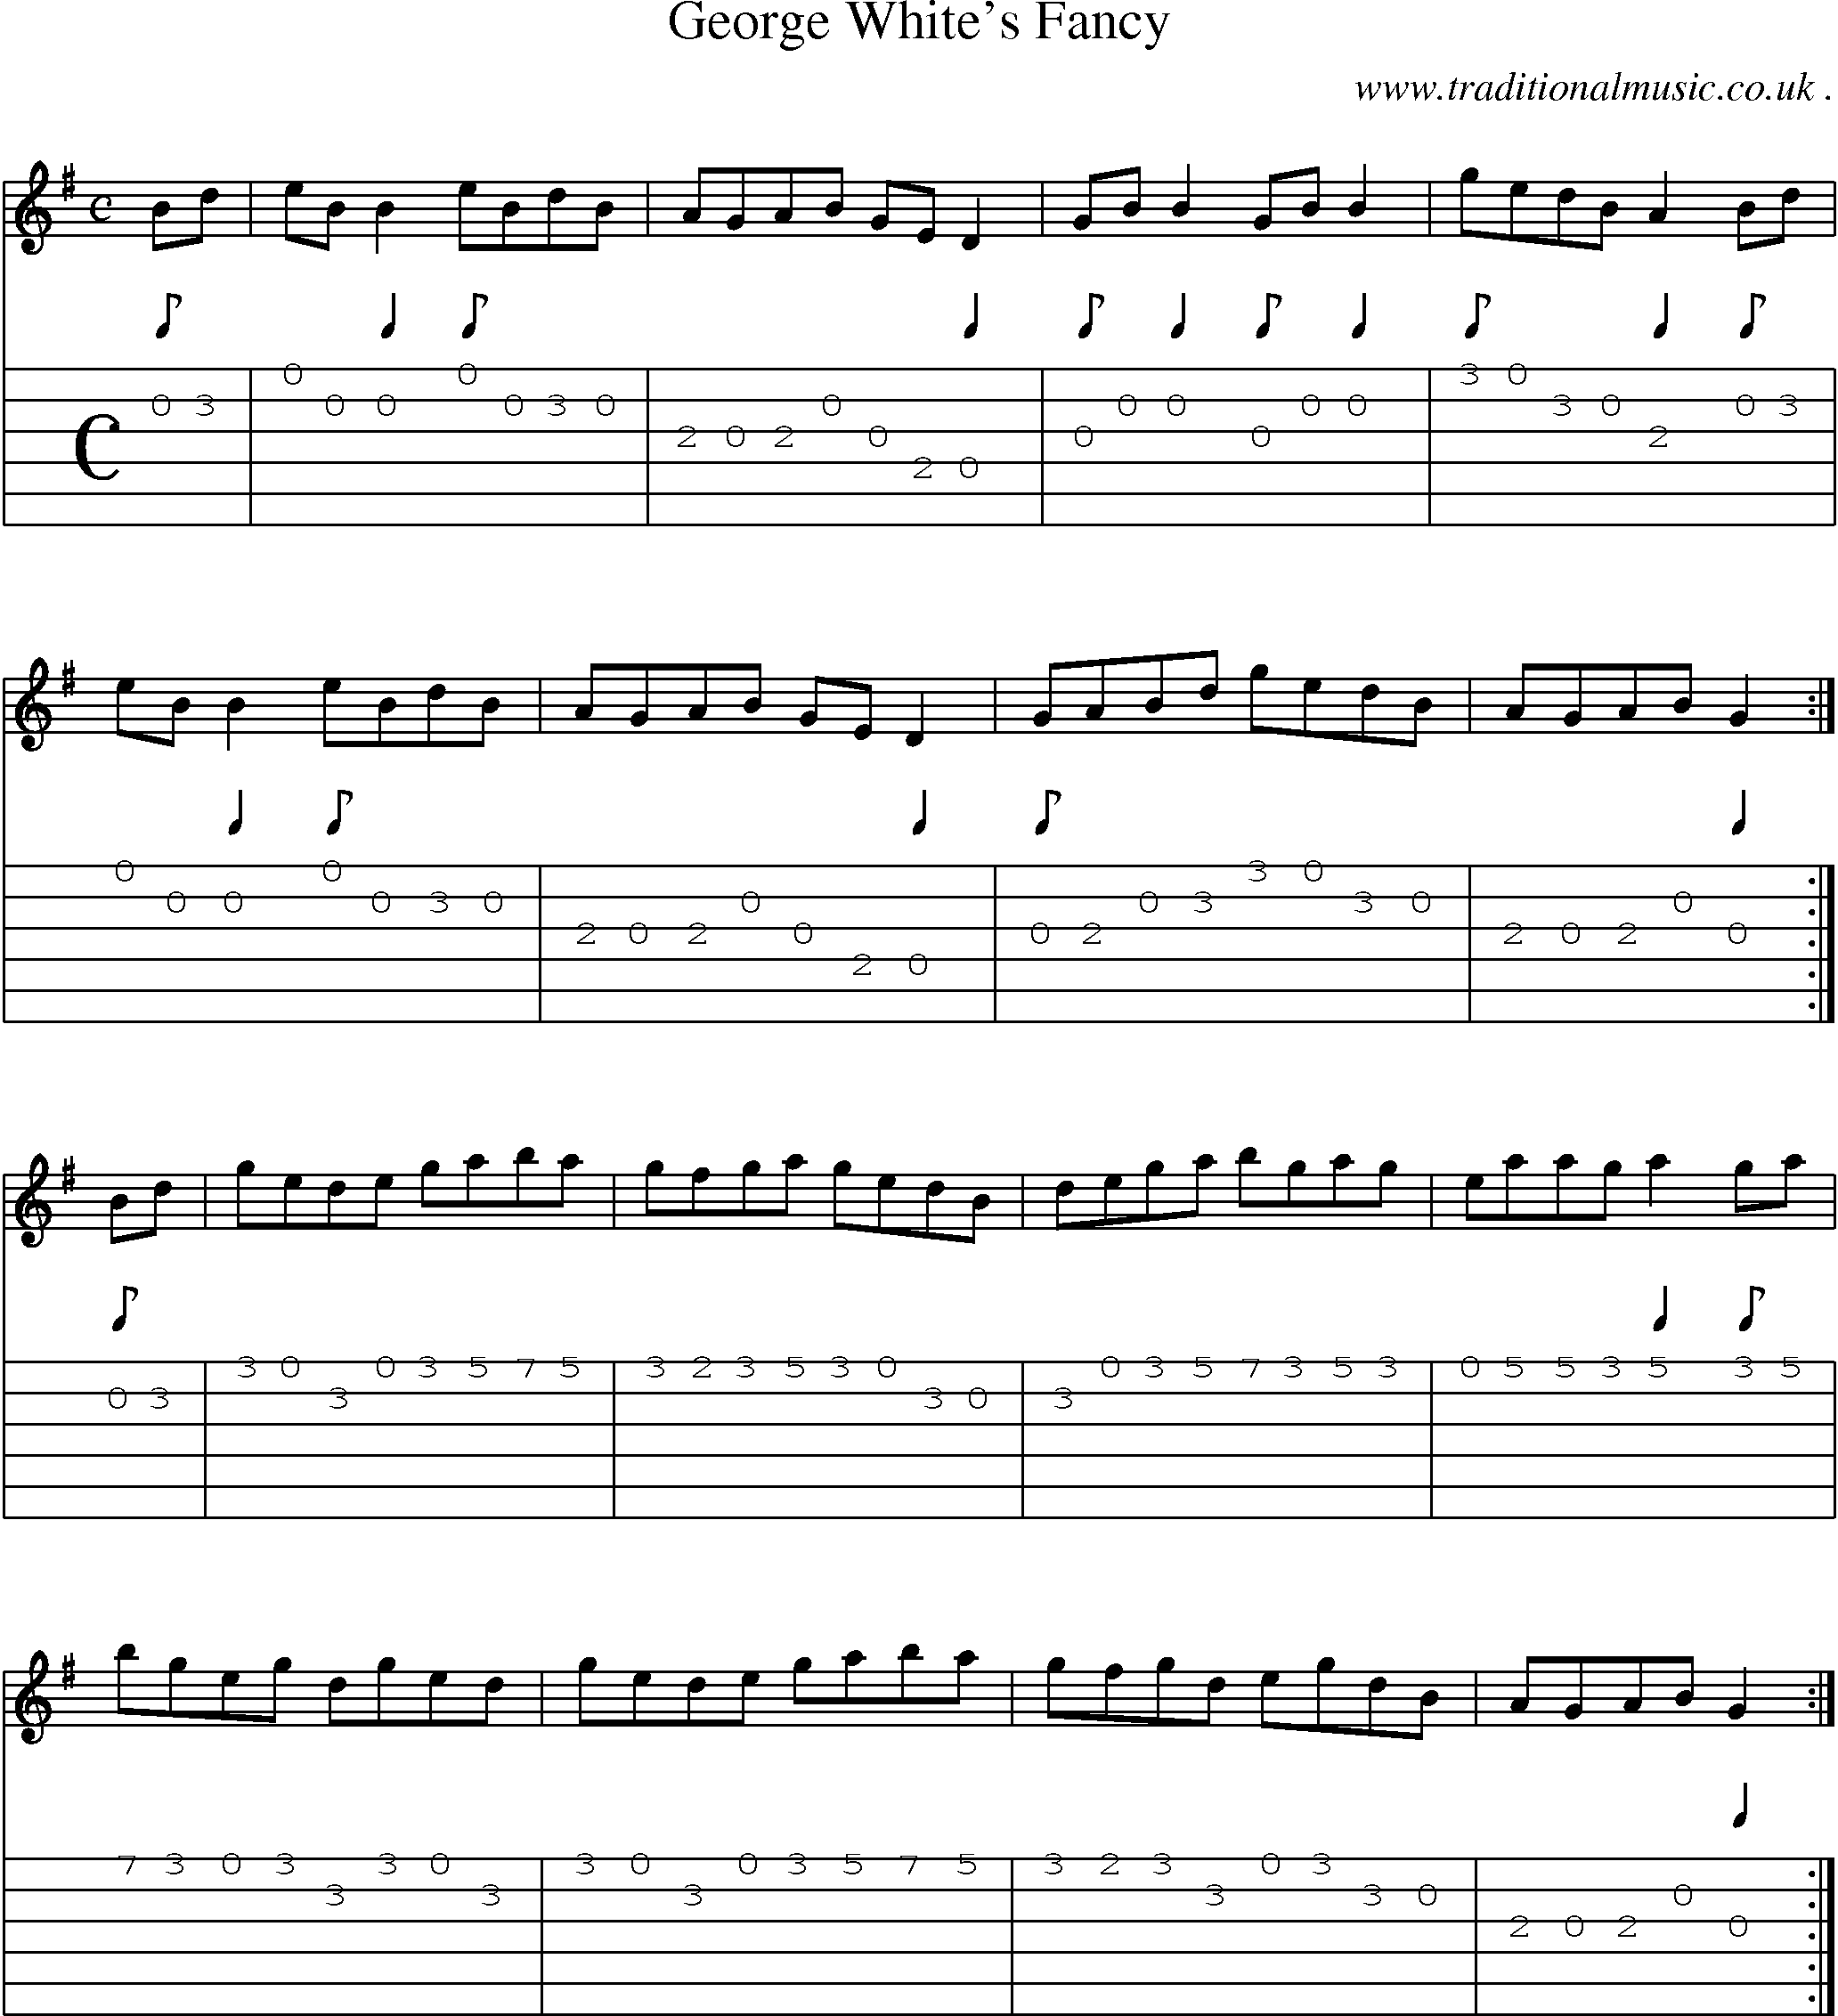 Sheet-Music and Guitar Tabs for George Whites Fancy